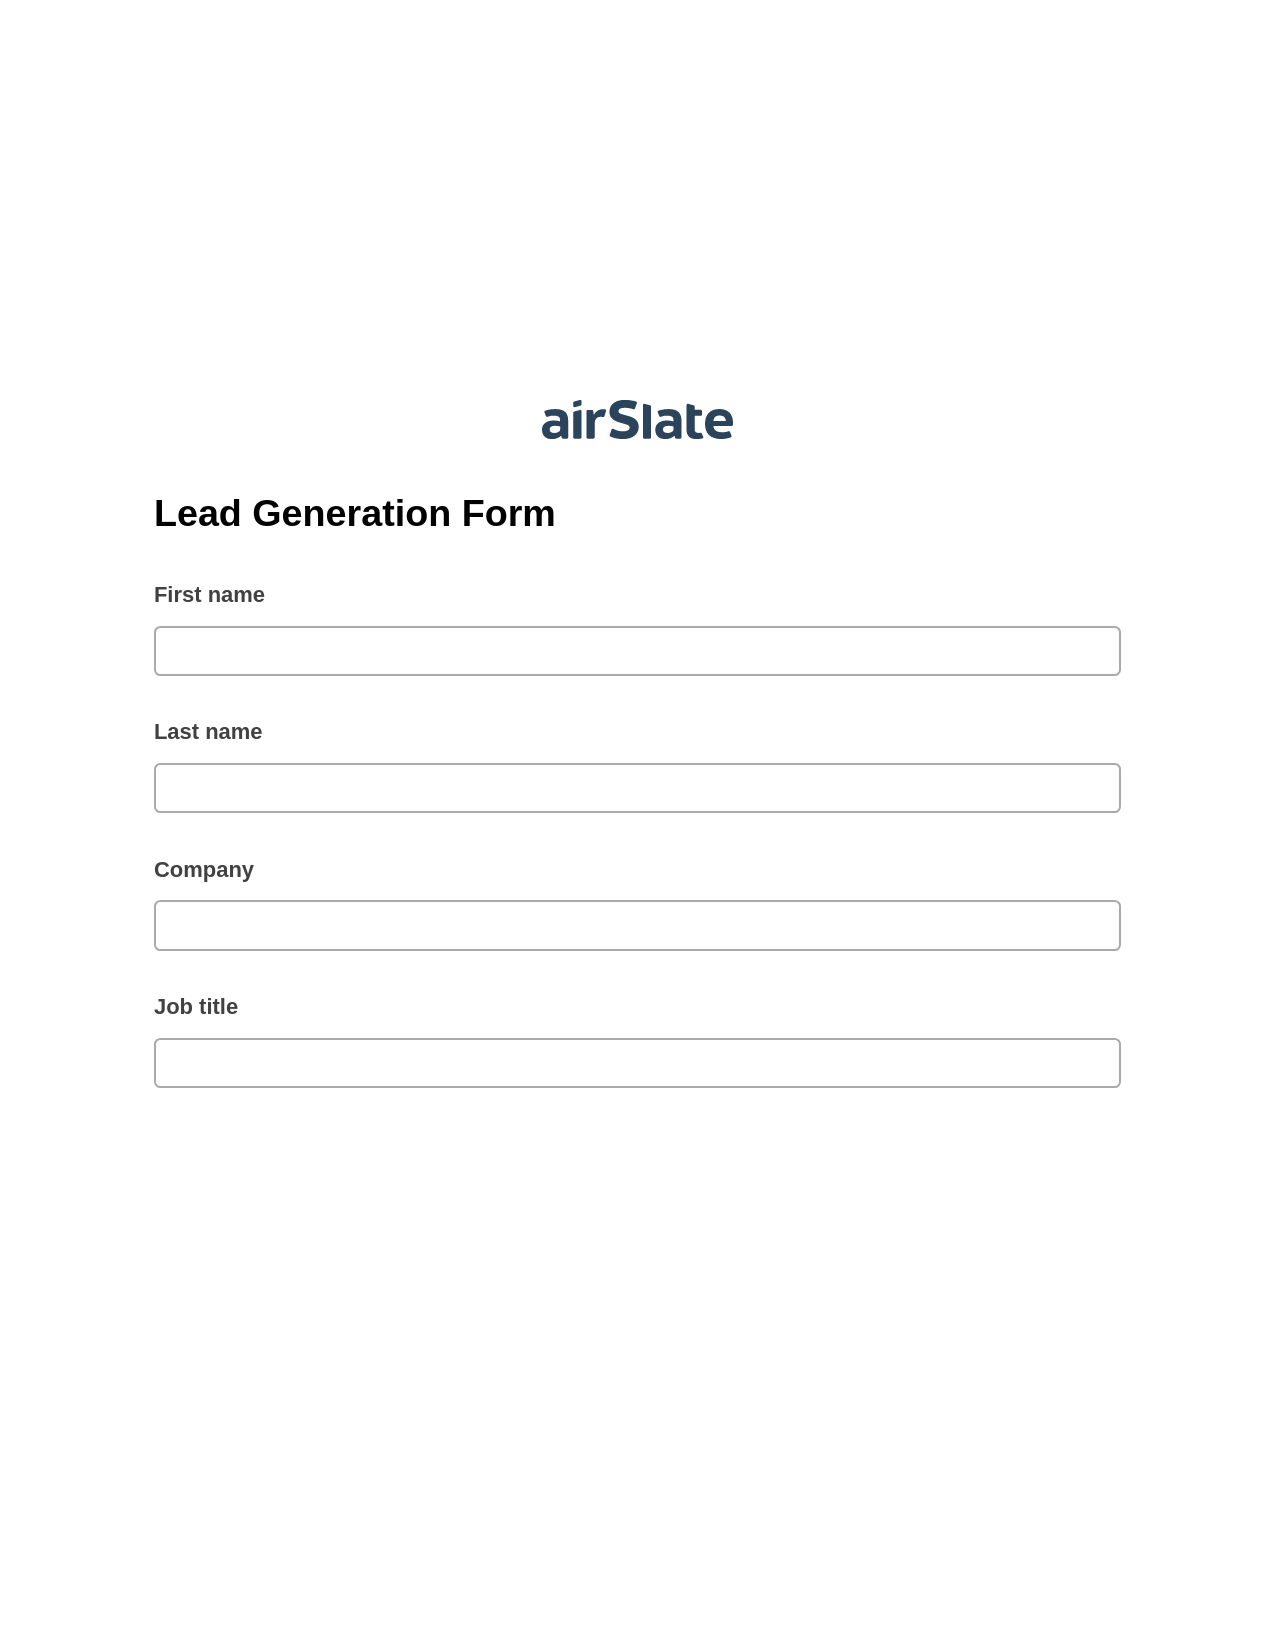 Multirole Lead Generation Form Pre-fill Dropdowns from CSV file Bot, Add Tags to Slate Bot, Archive to Google Drive Bot